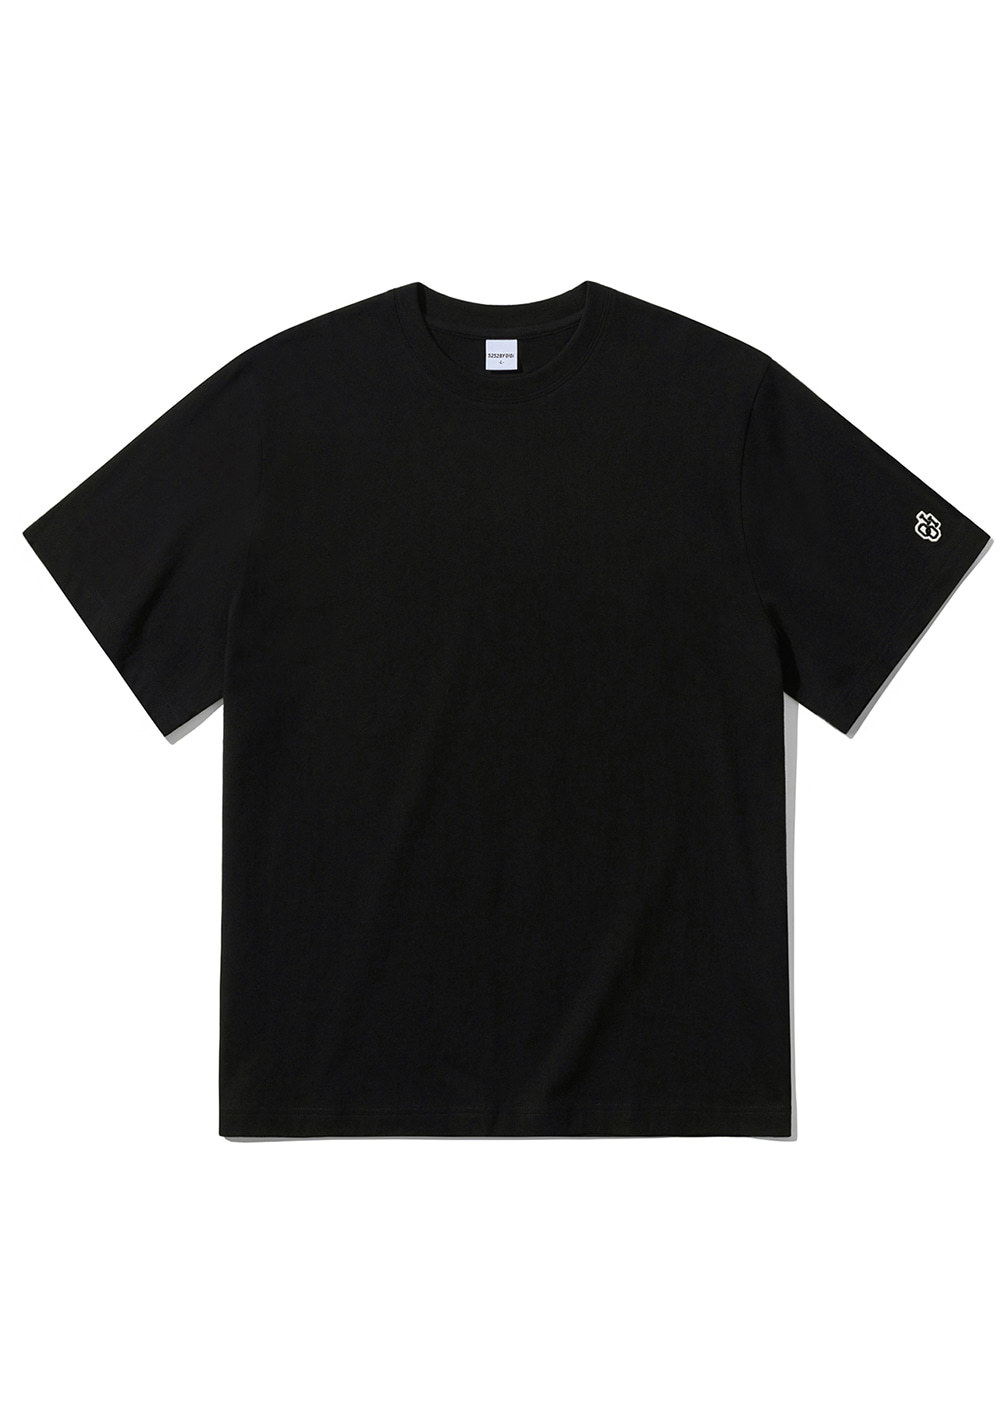 OIOI_BASIC PATCH T-SHIRTS_52BHALCTS05